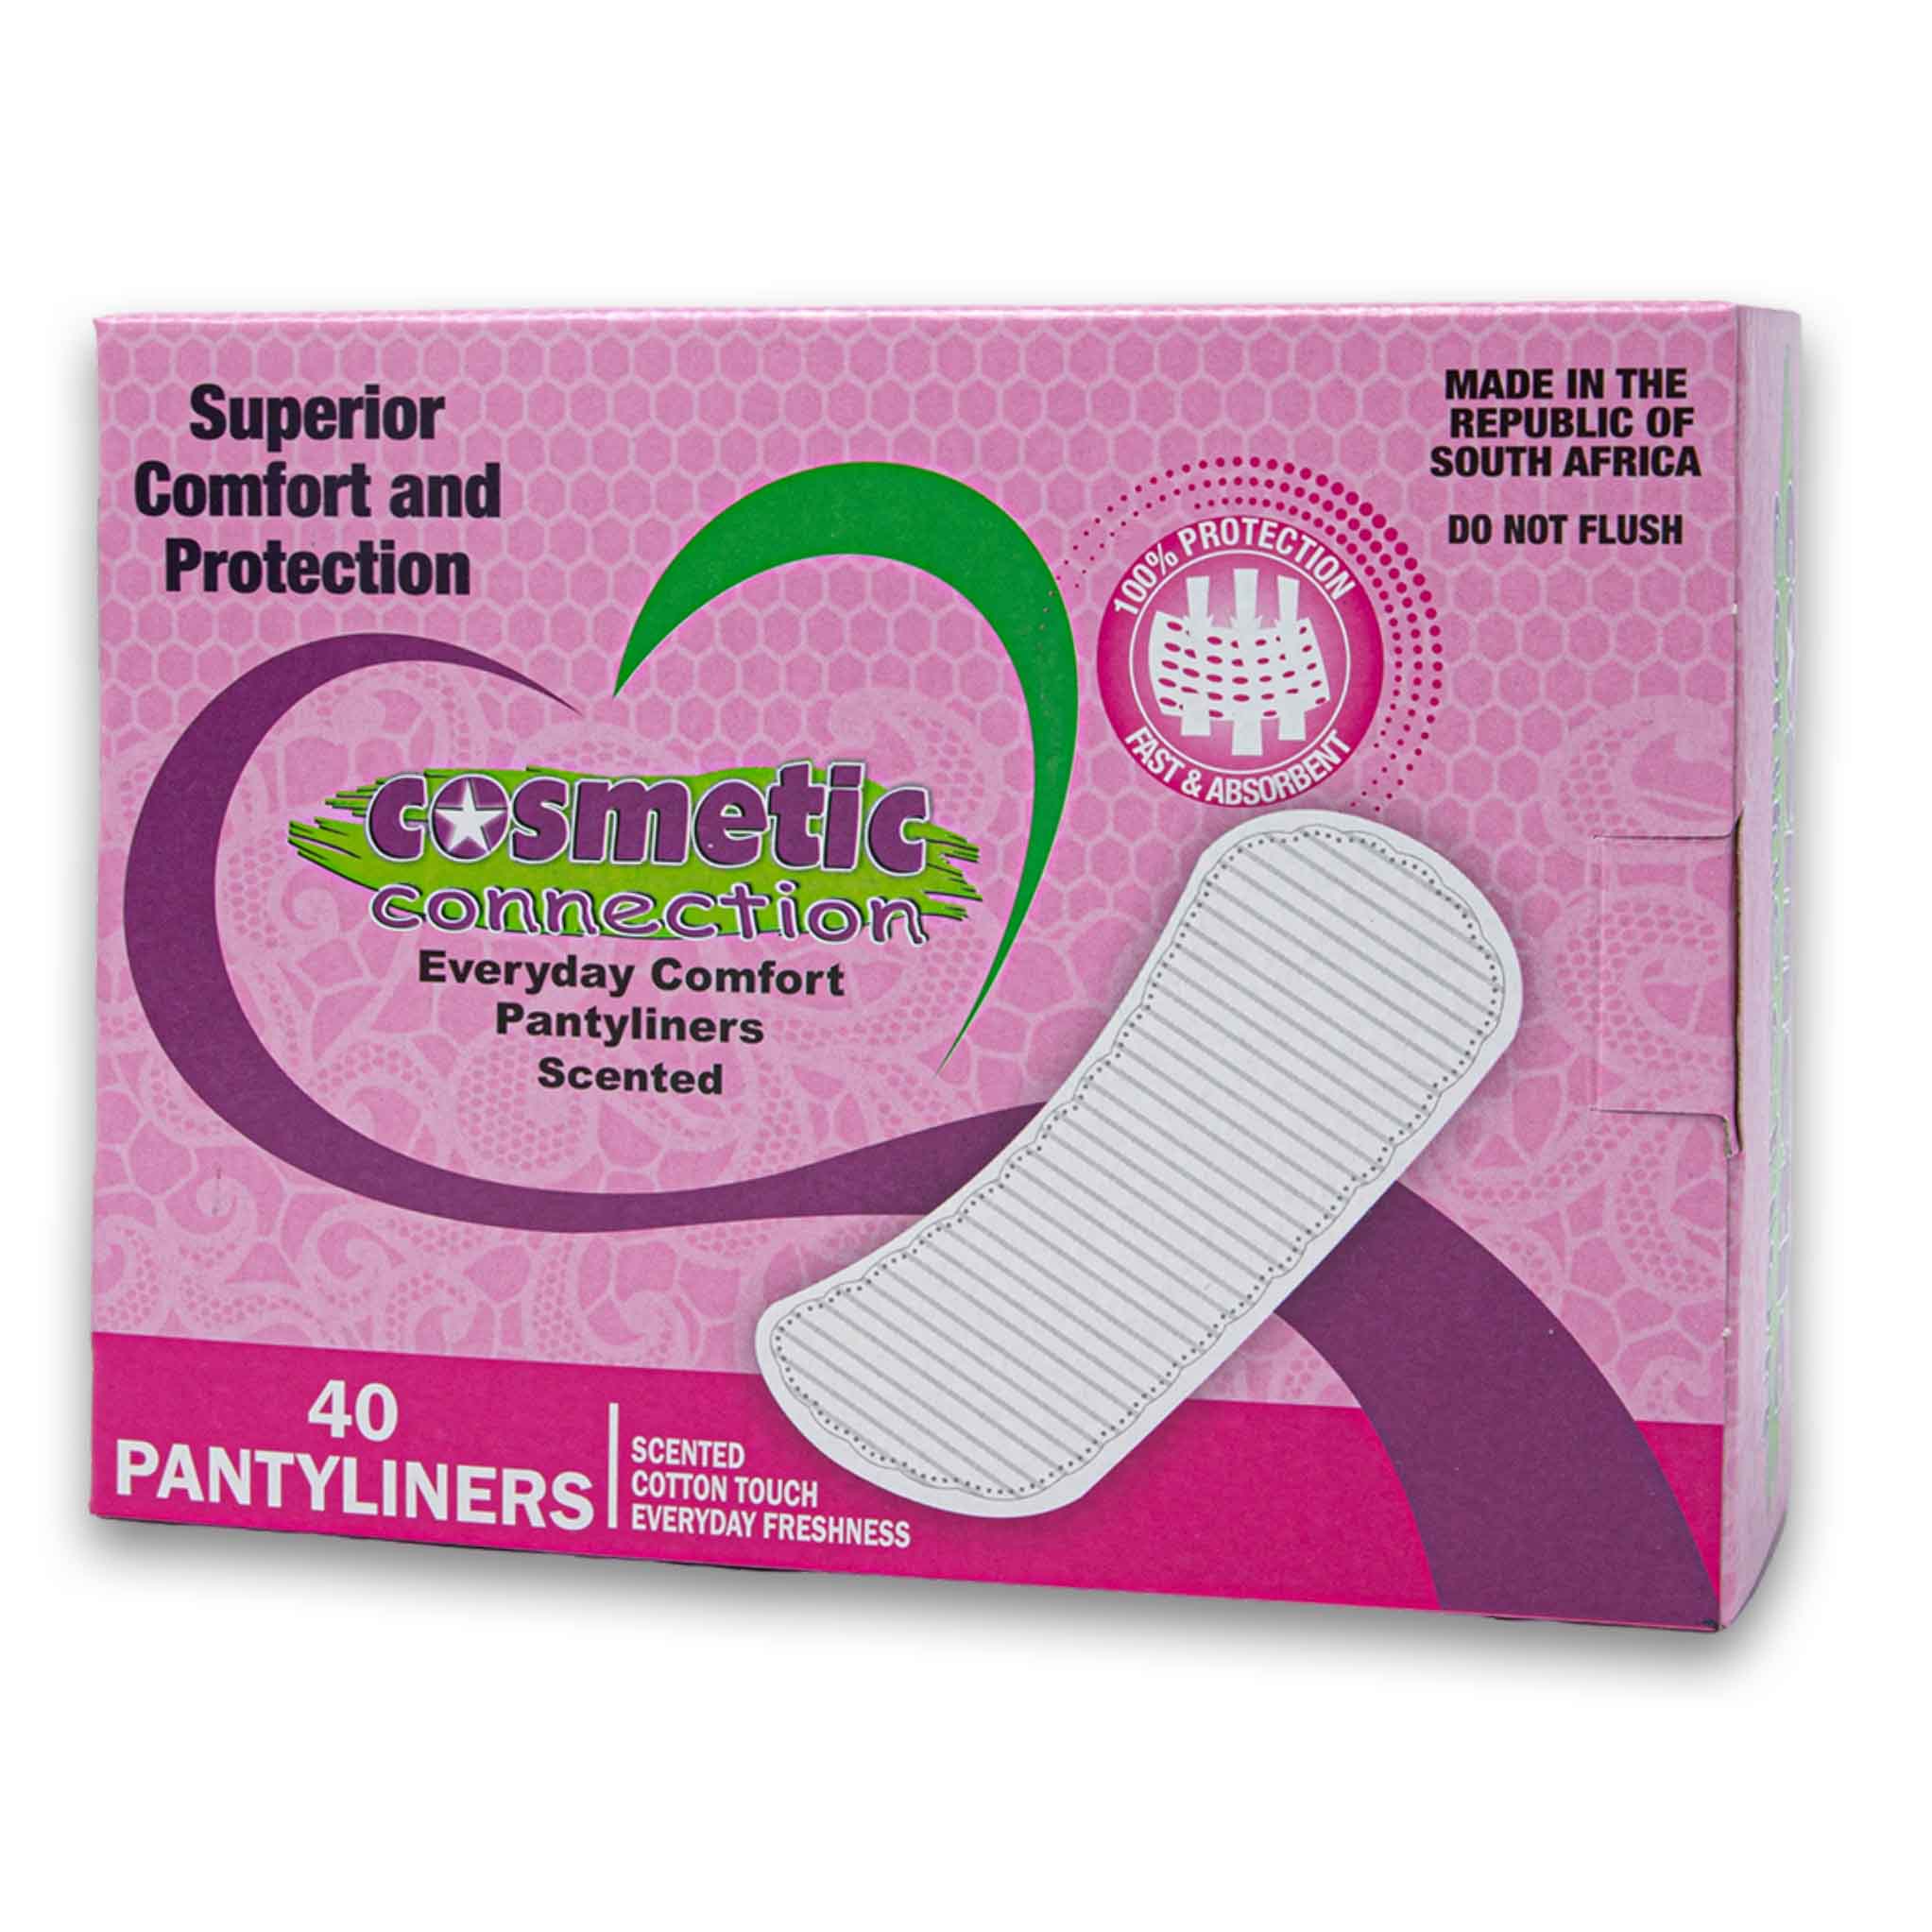 Comfitex Unscented Pantyliners 100 Pack